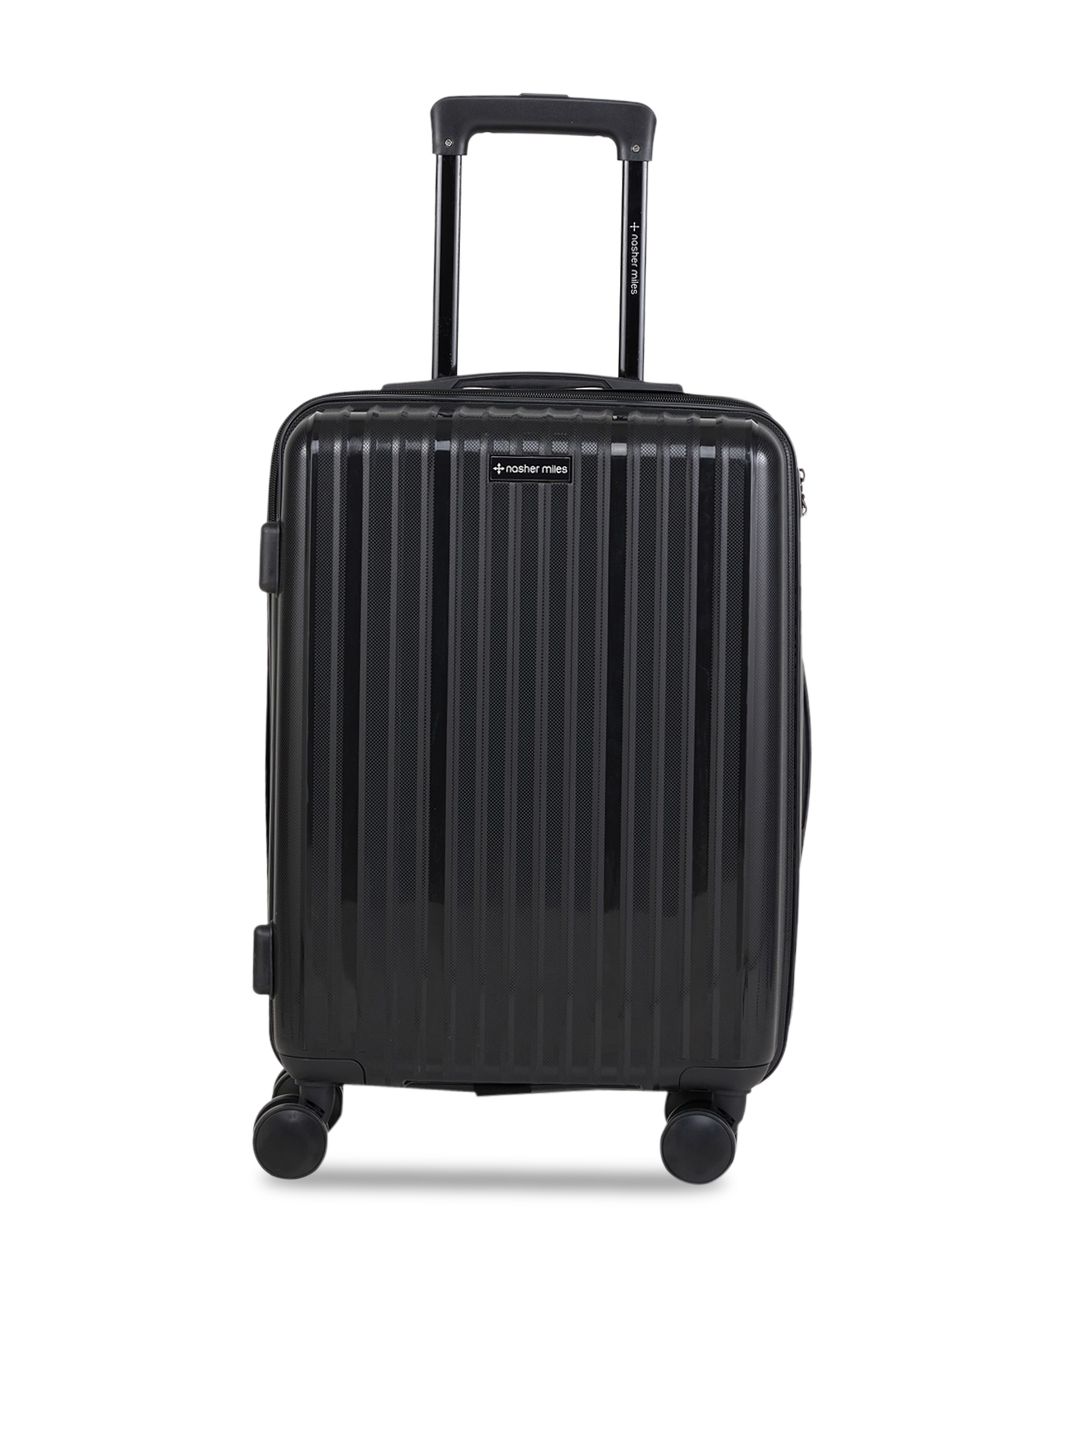 Nasher Miles Black Textured Hard-Sided Trolley Suitcases Price in India